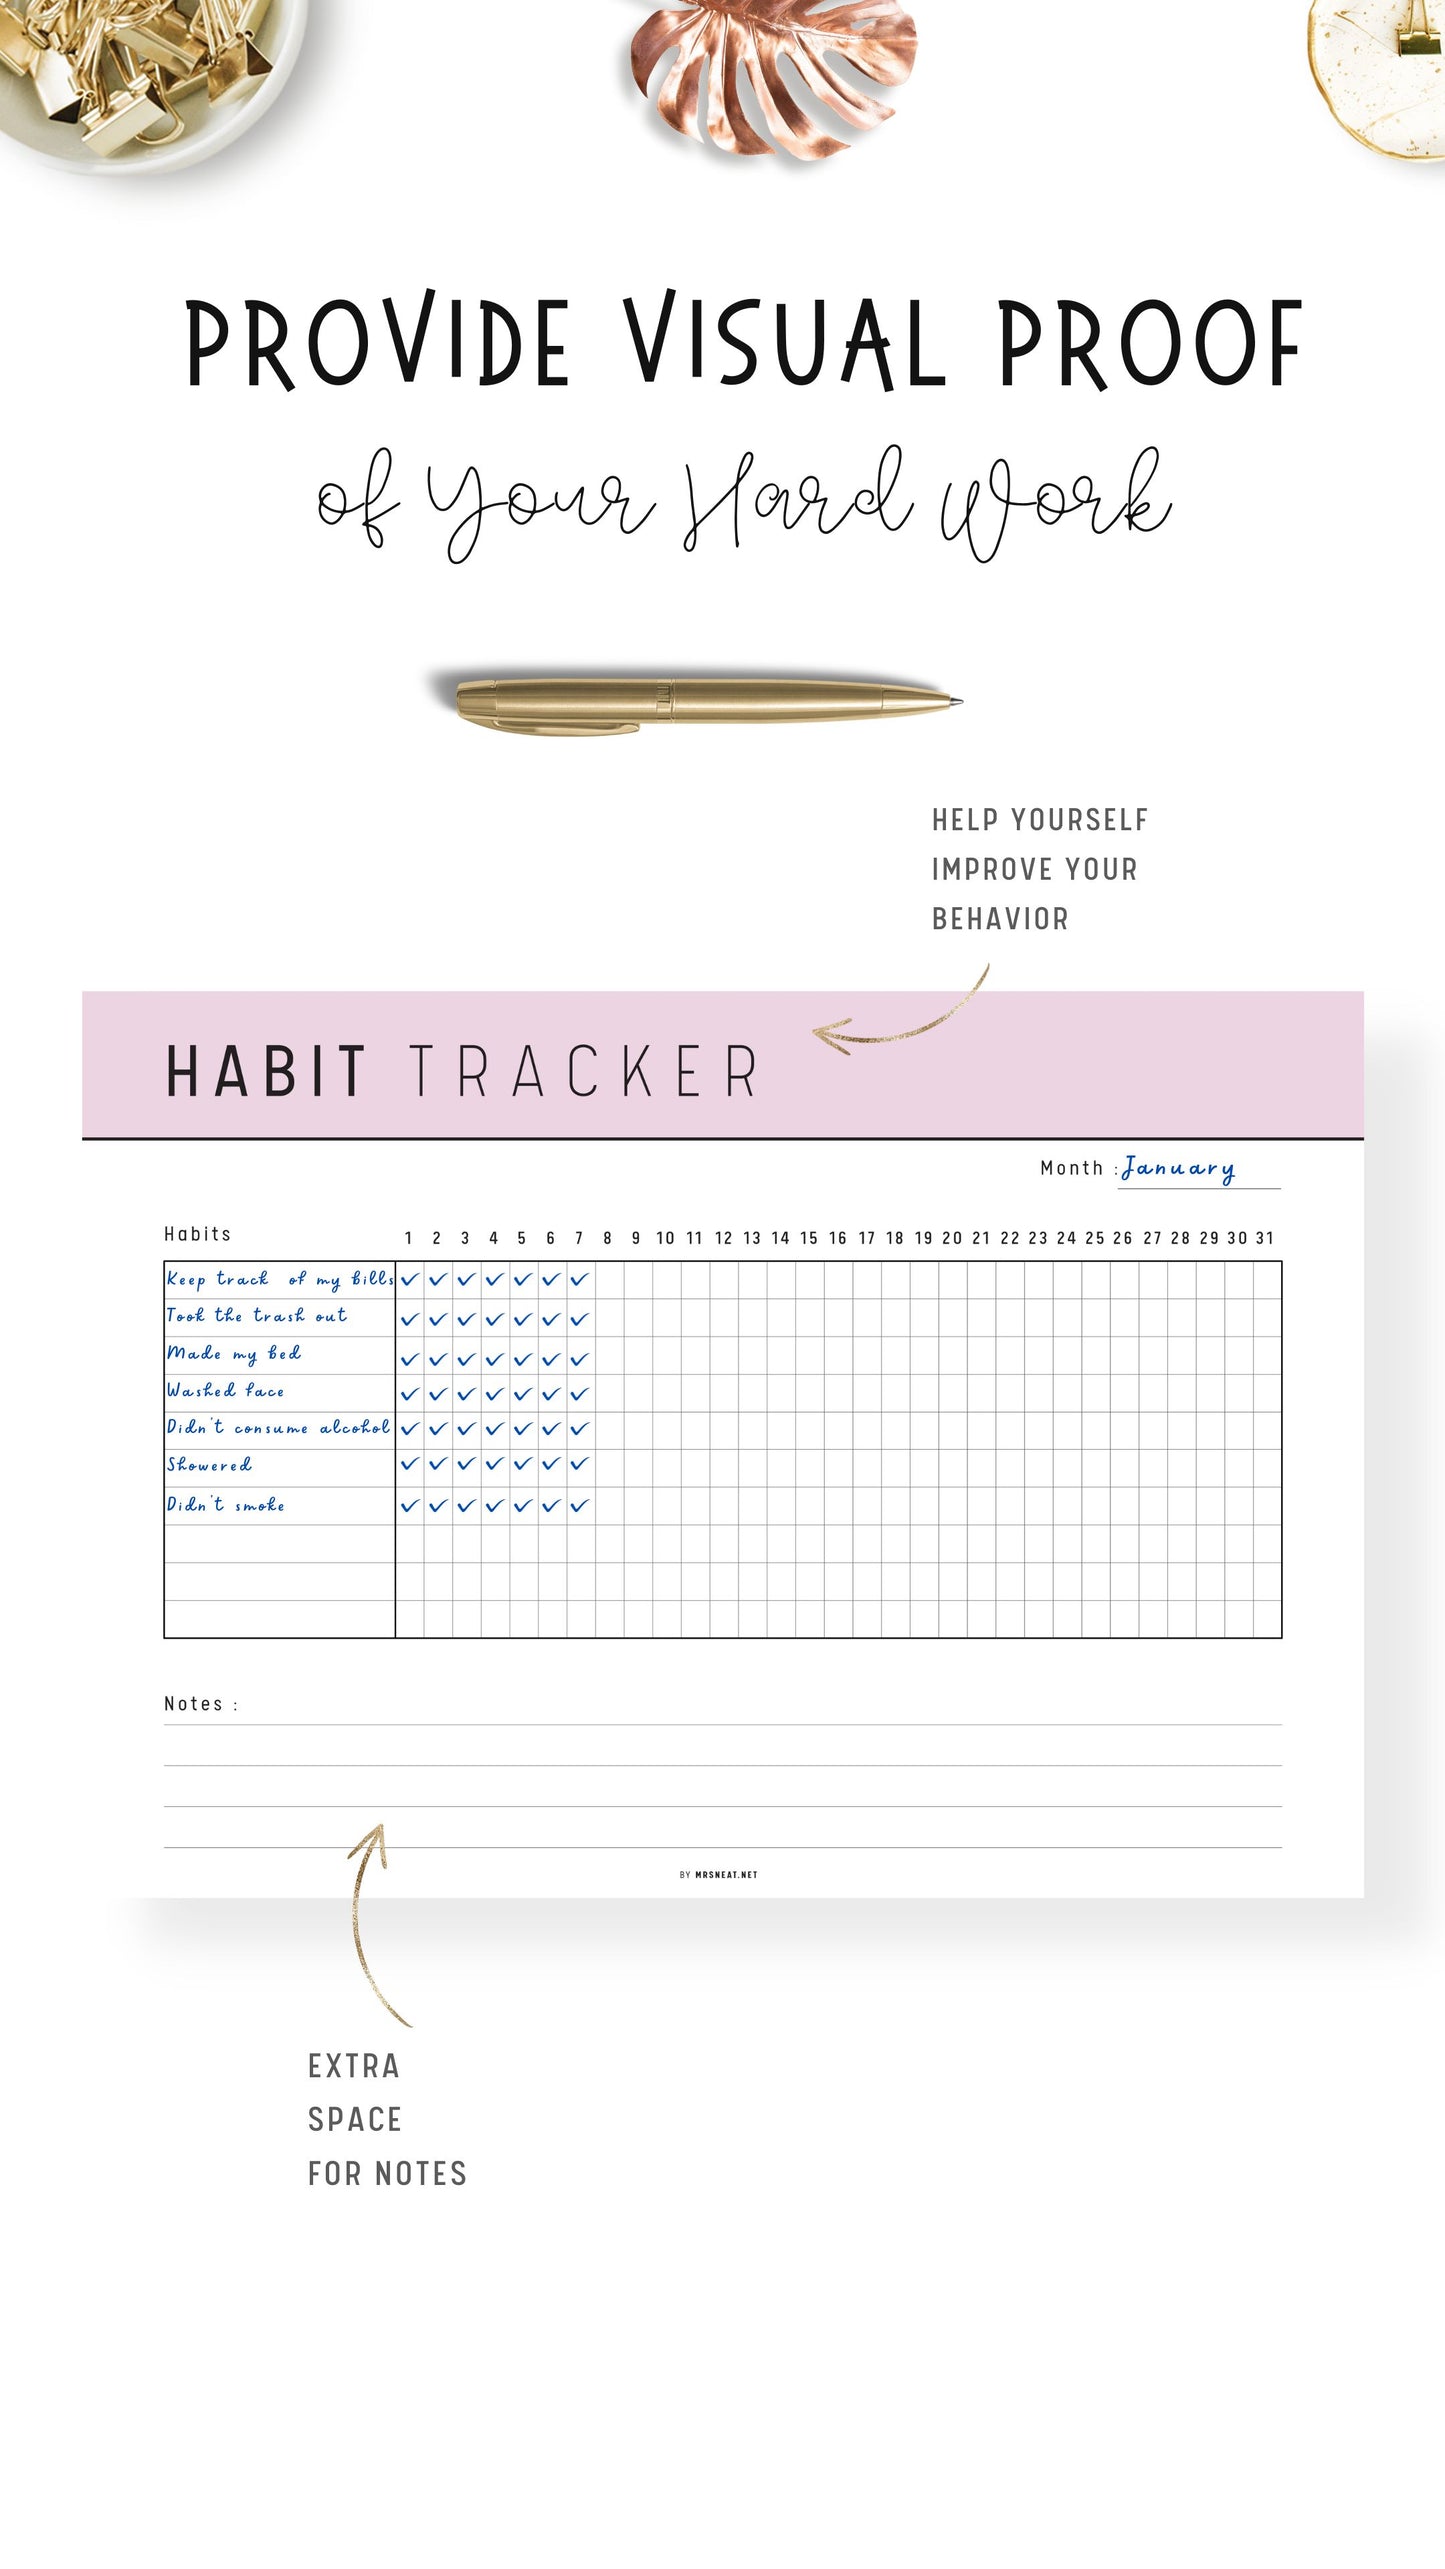 How to use monthly habit tracker